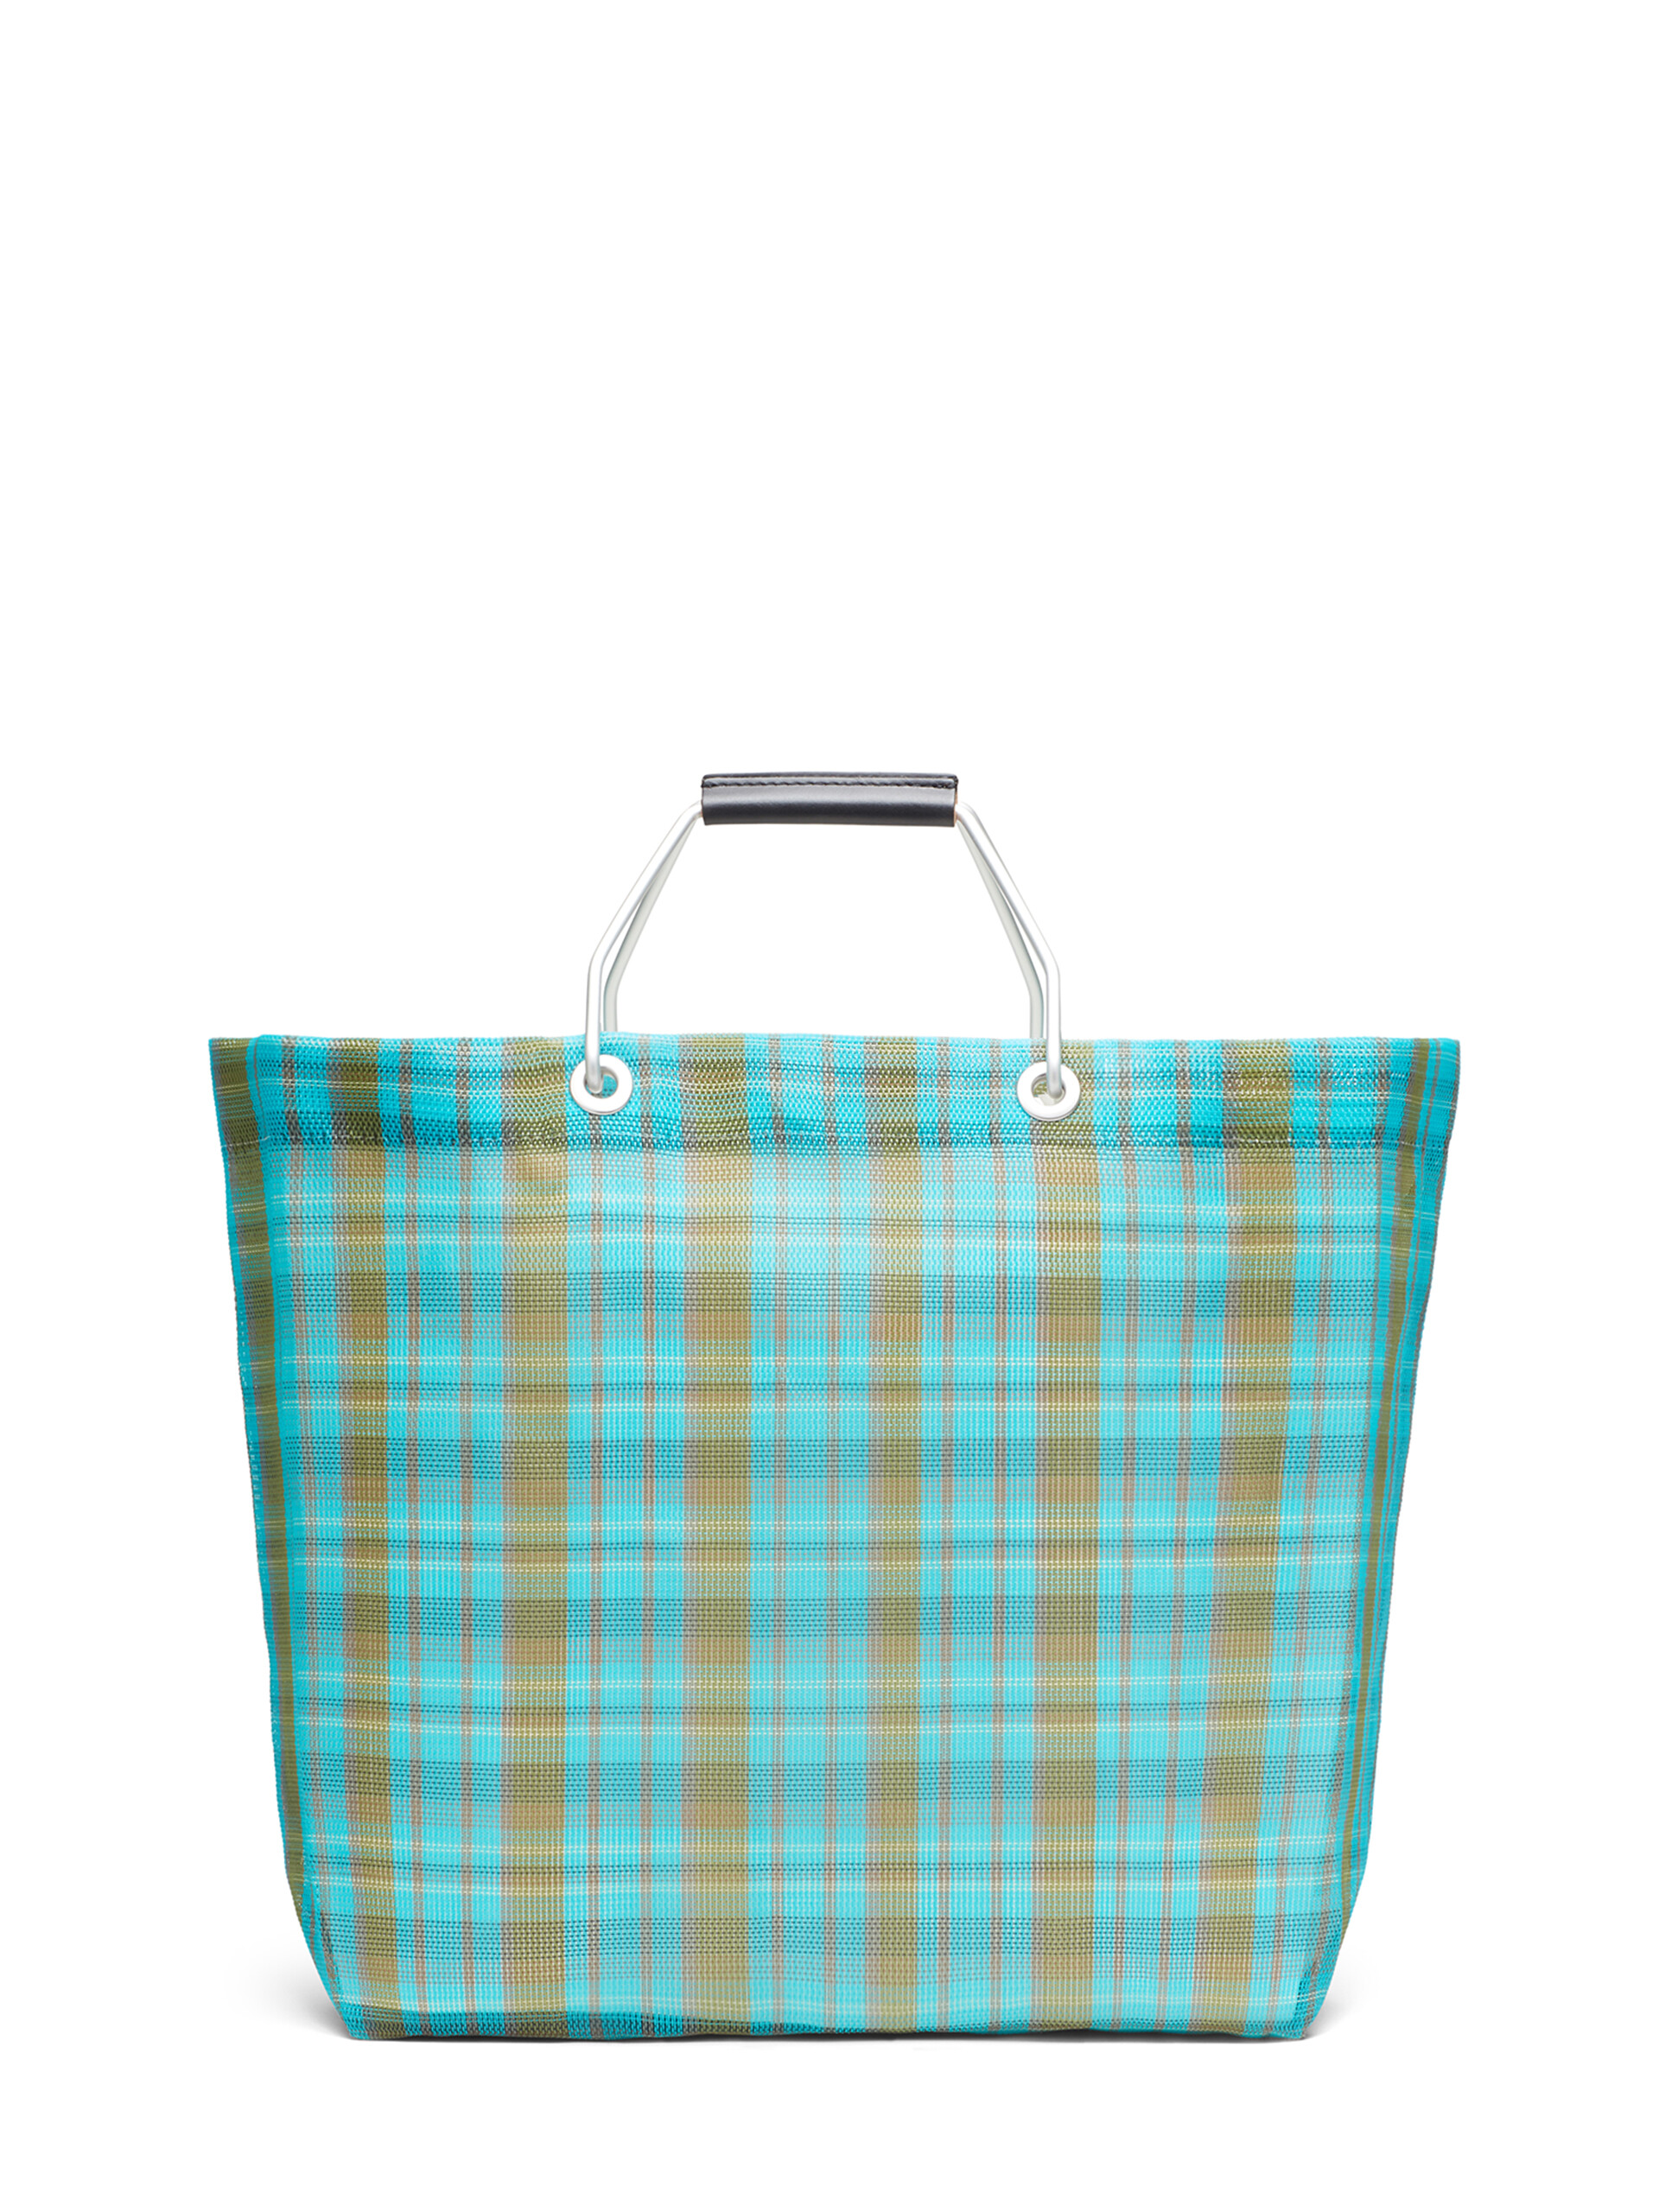 MARNI MARKET bag in pale blue and green - Bags - Image 3